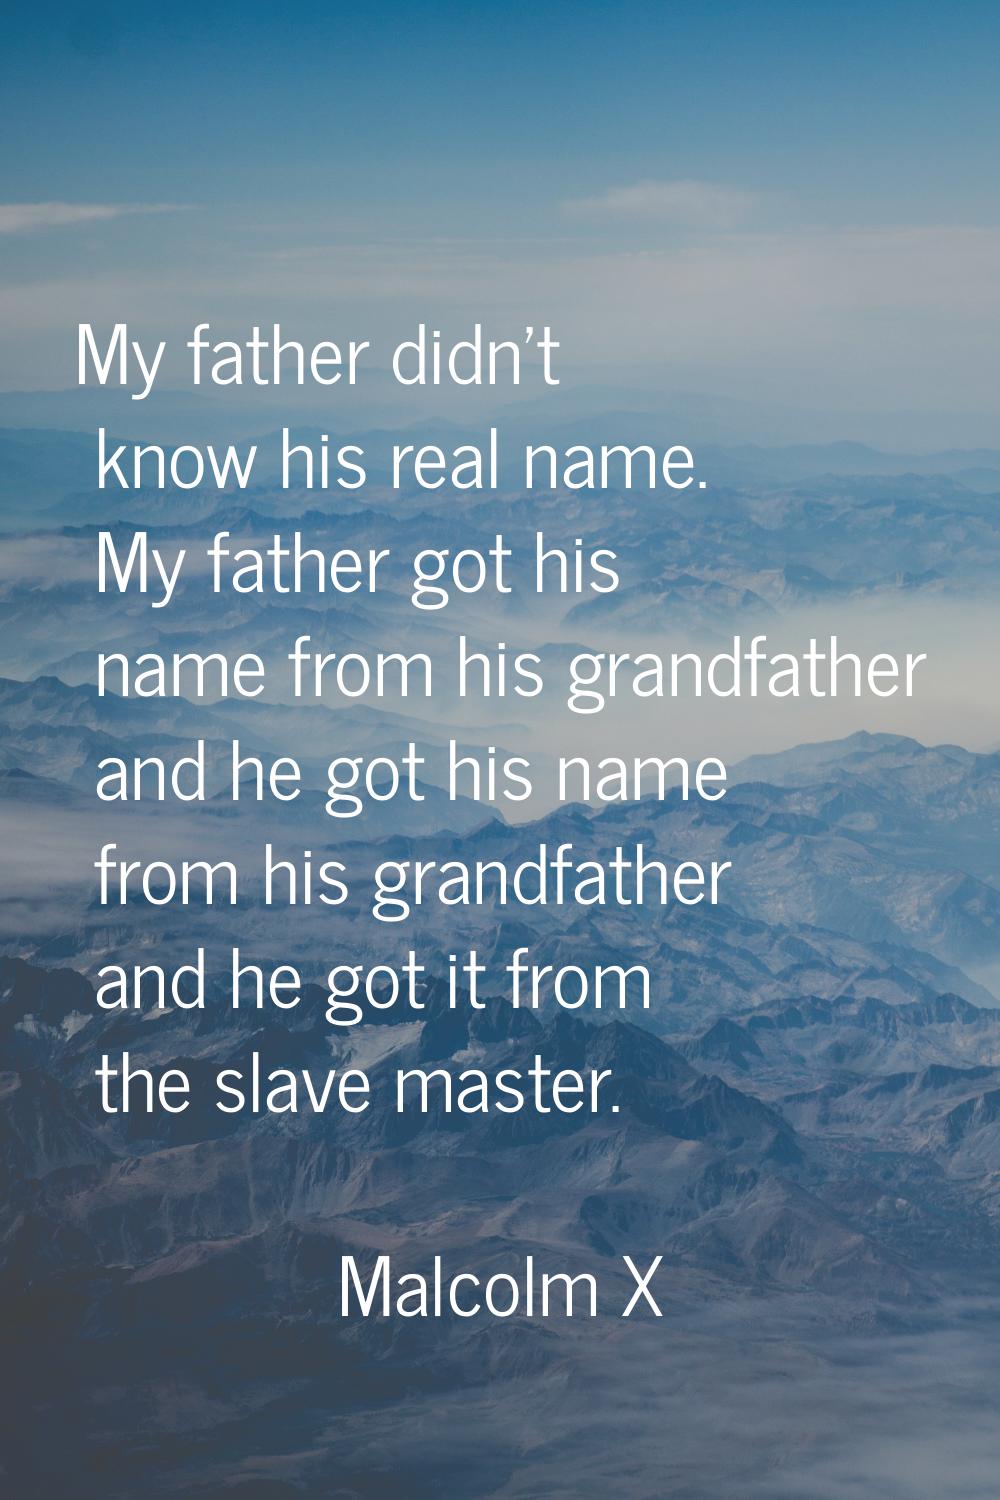 My father didn't know his real name. My father got his name from his grandfather and he got his nam